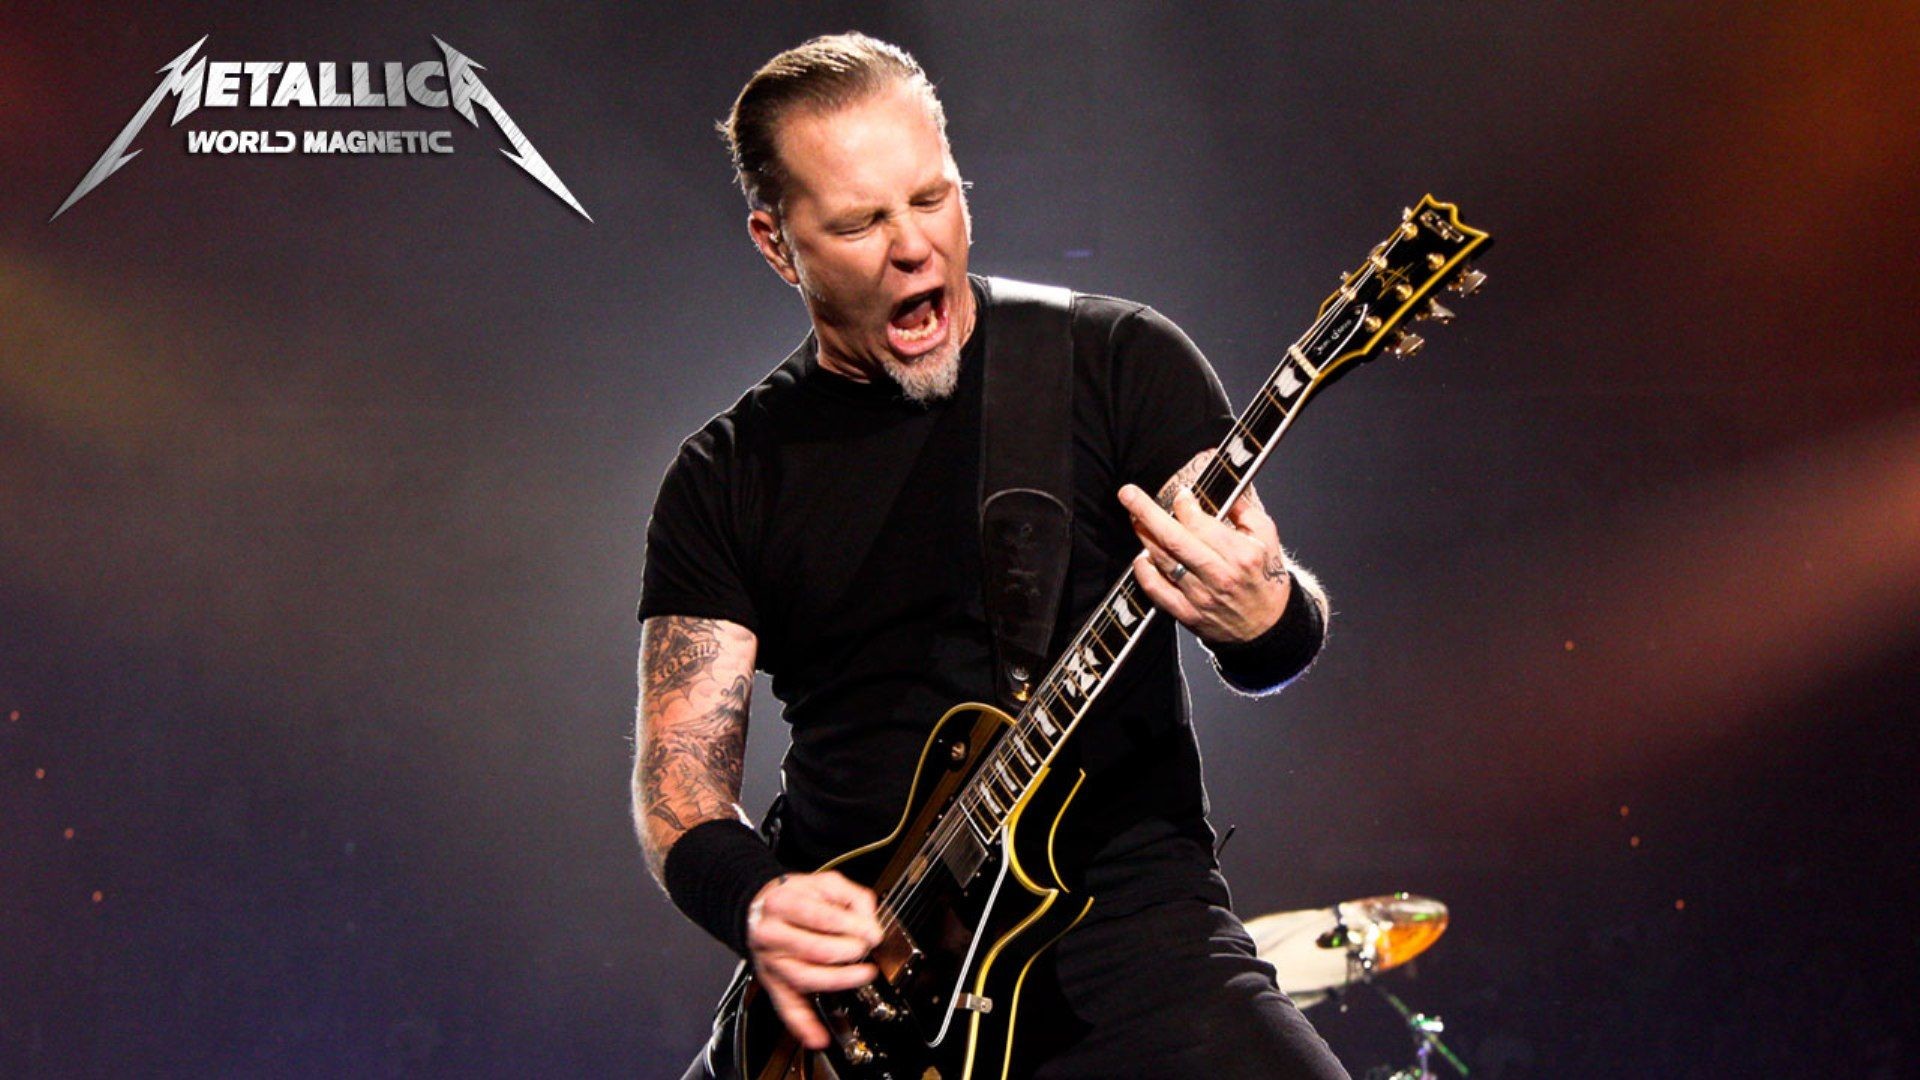 1920x1080 Other pictures of Metallica: